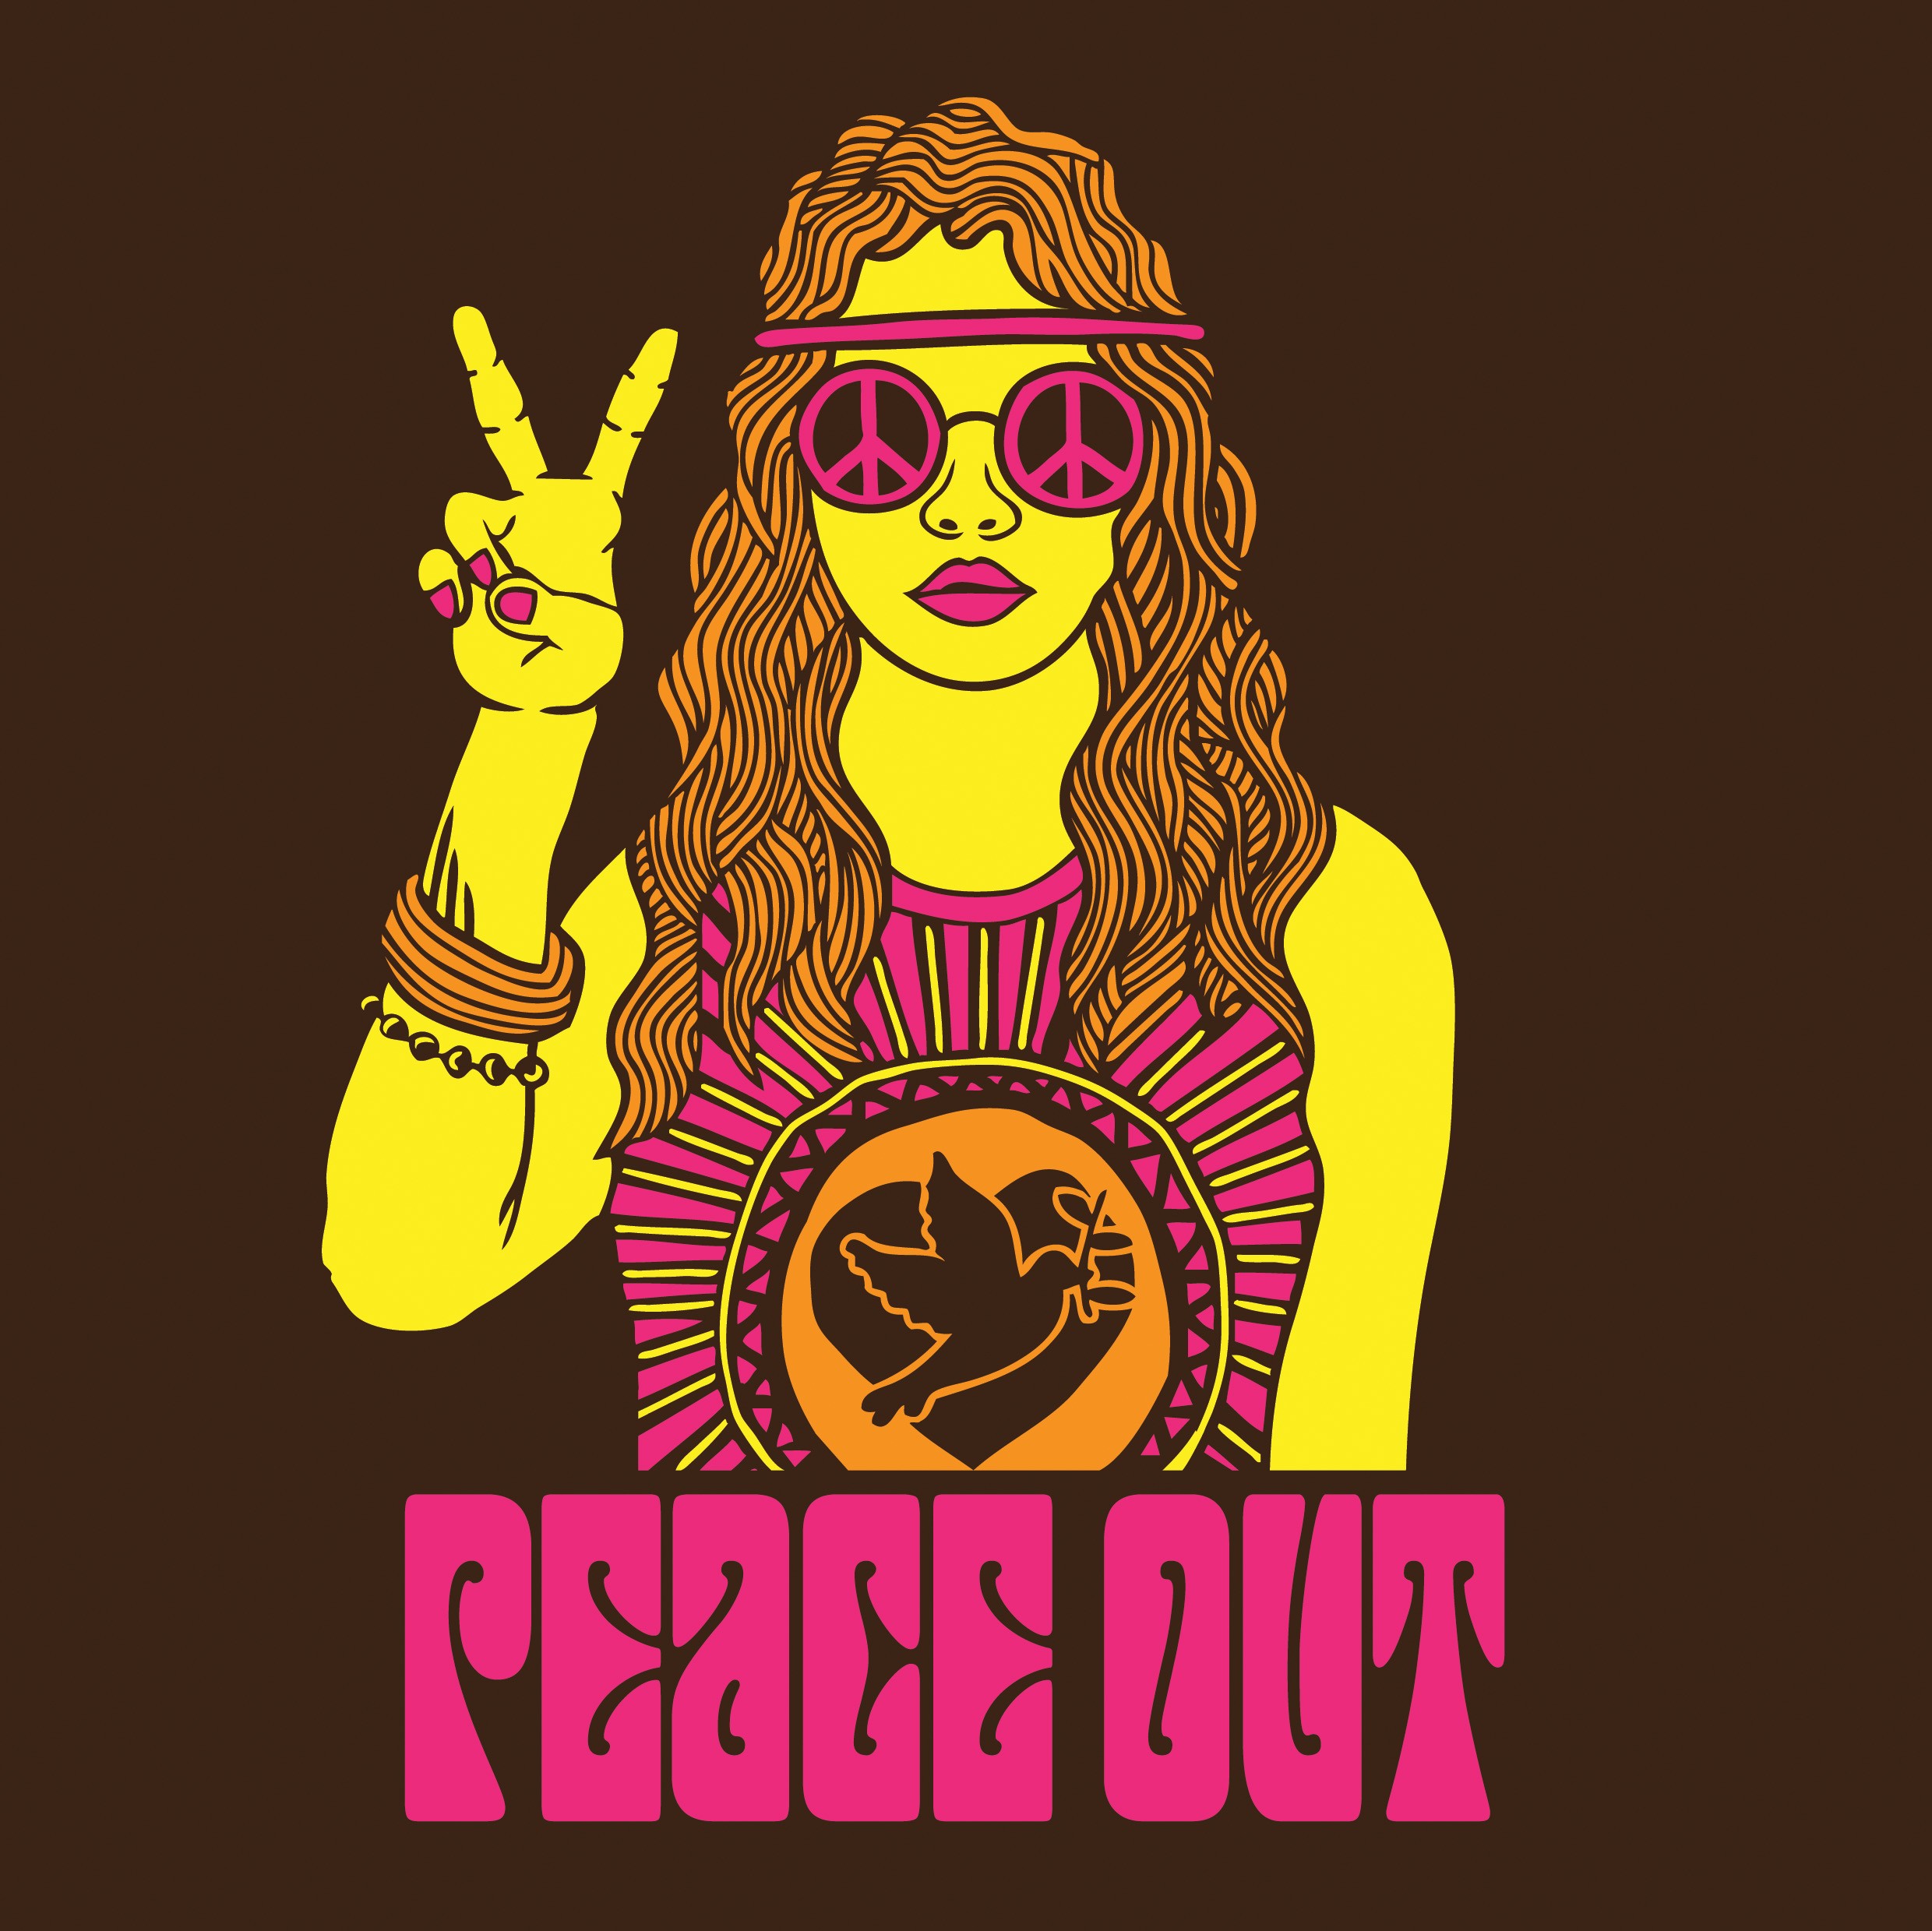 Image with "PEACE OUT" and individual holding up the peace sign